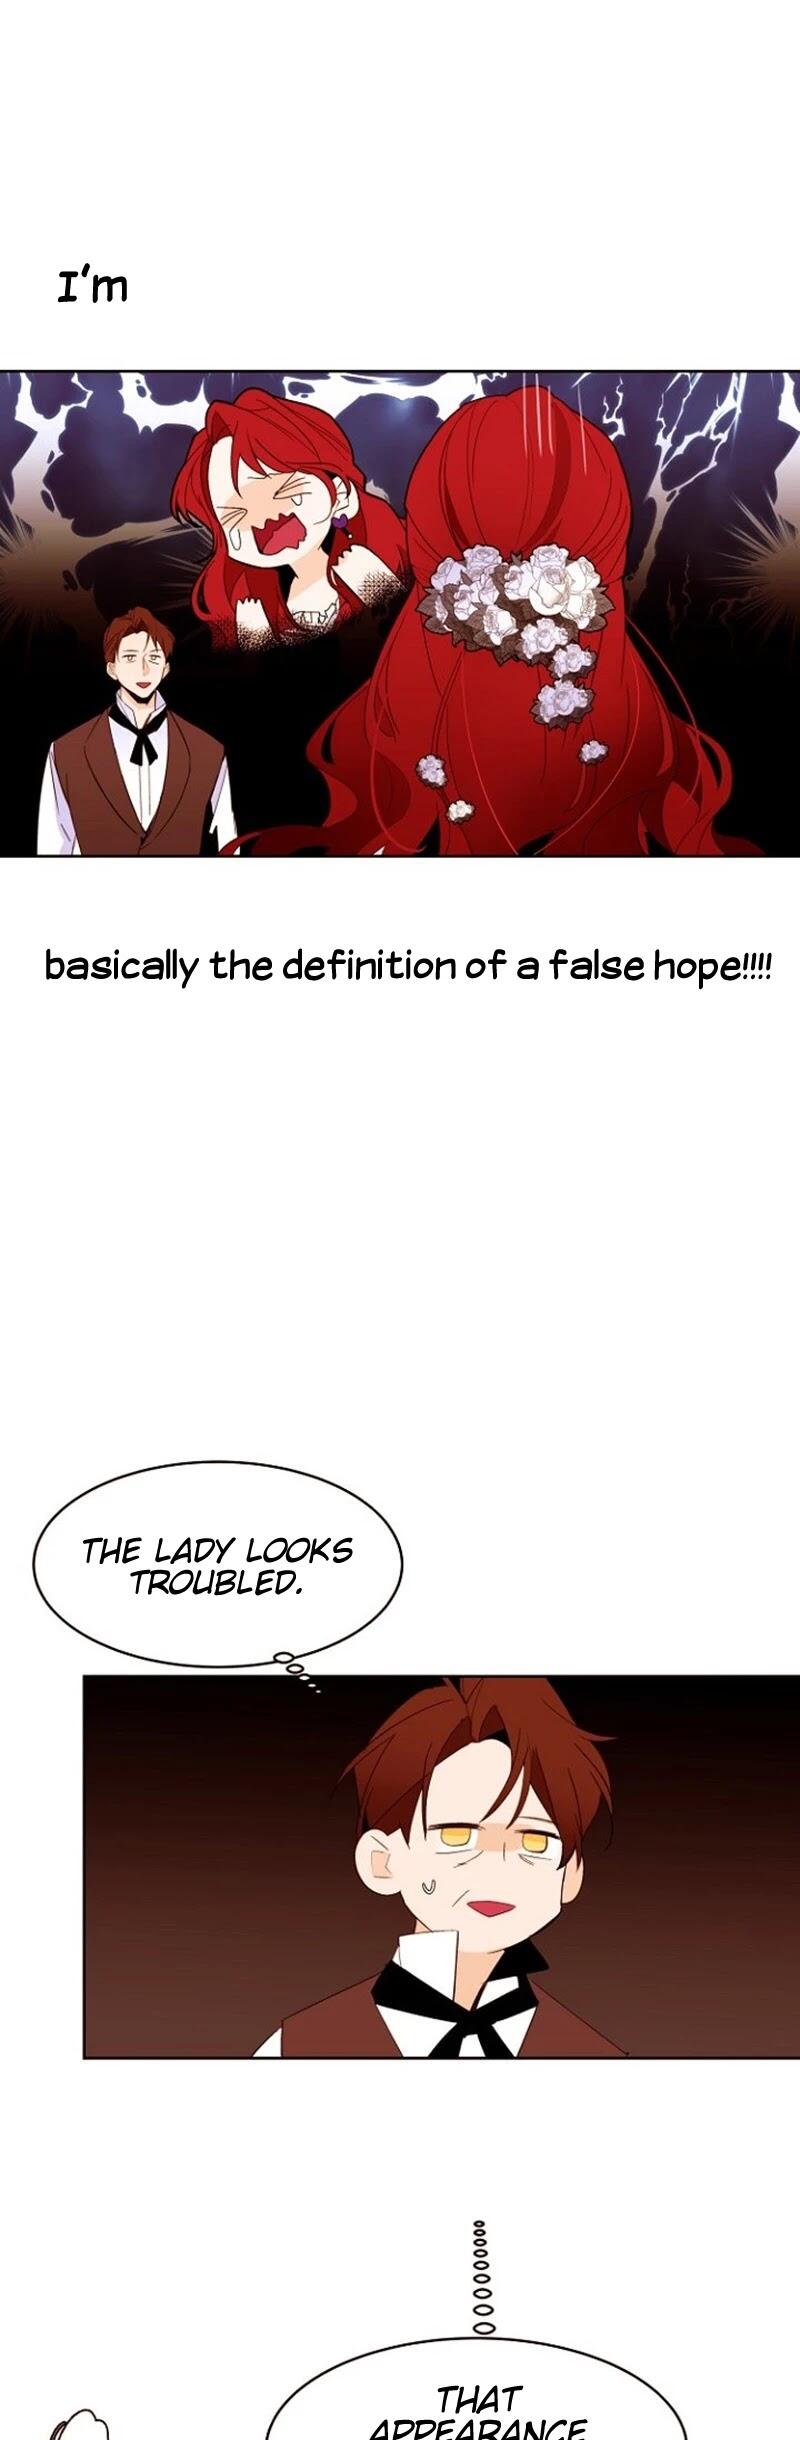 The Stereotypical Life Of A Reincarnated Lady Chapter 17 page 7 - Mangakakalots.com